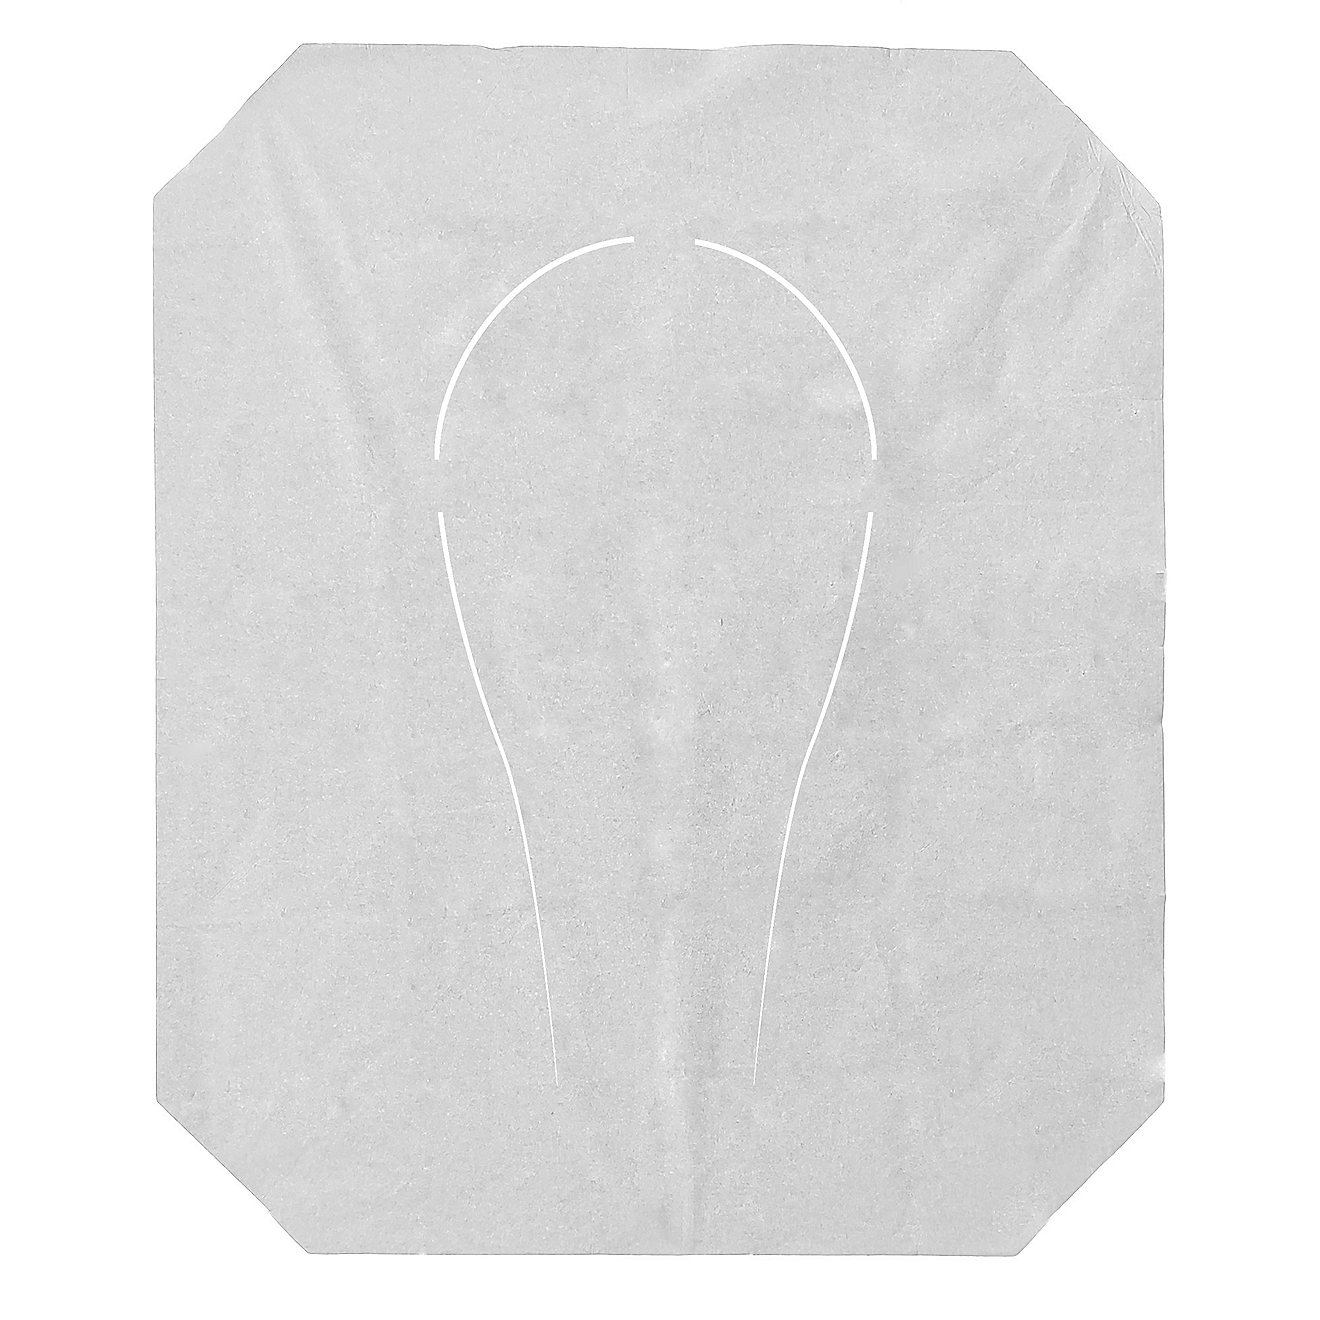 Coghlan’s Toilet Seat Covers 10-Pack                                                                                           - view number 3